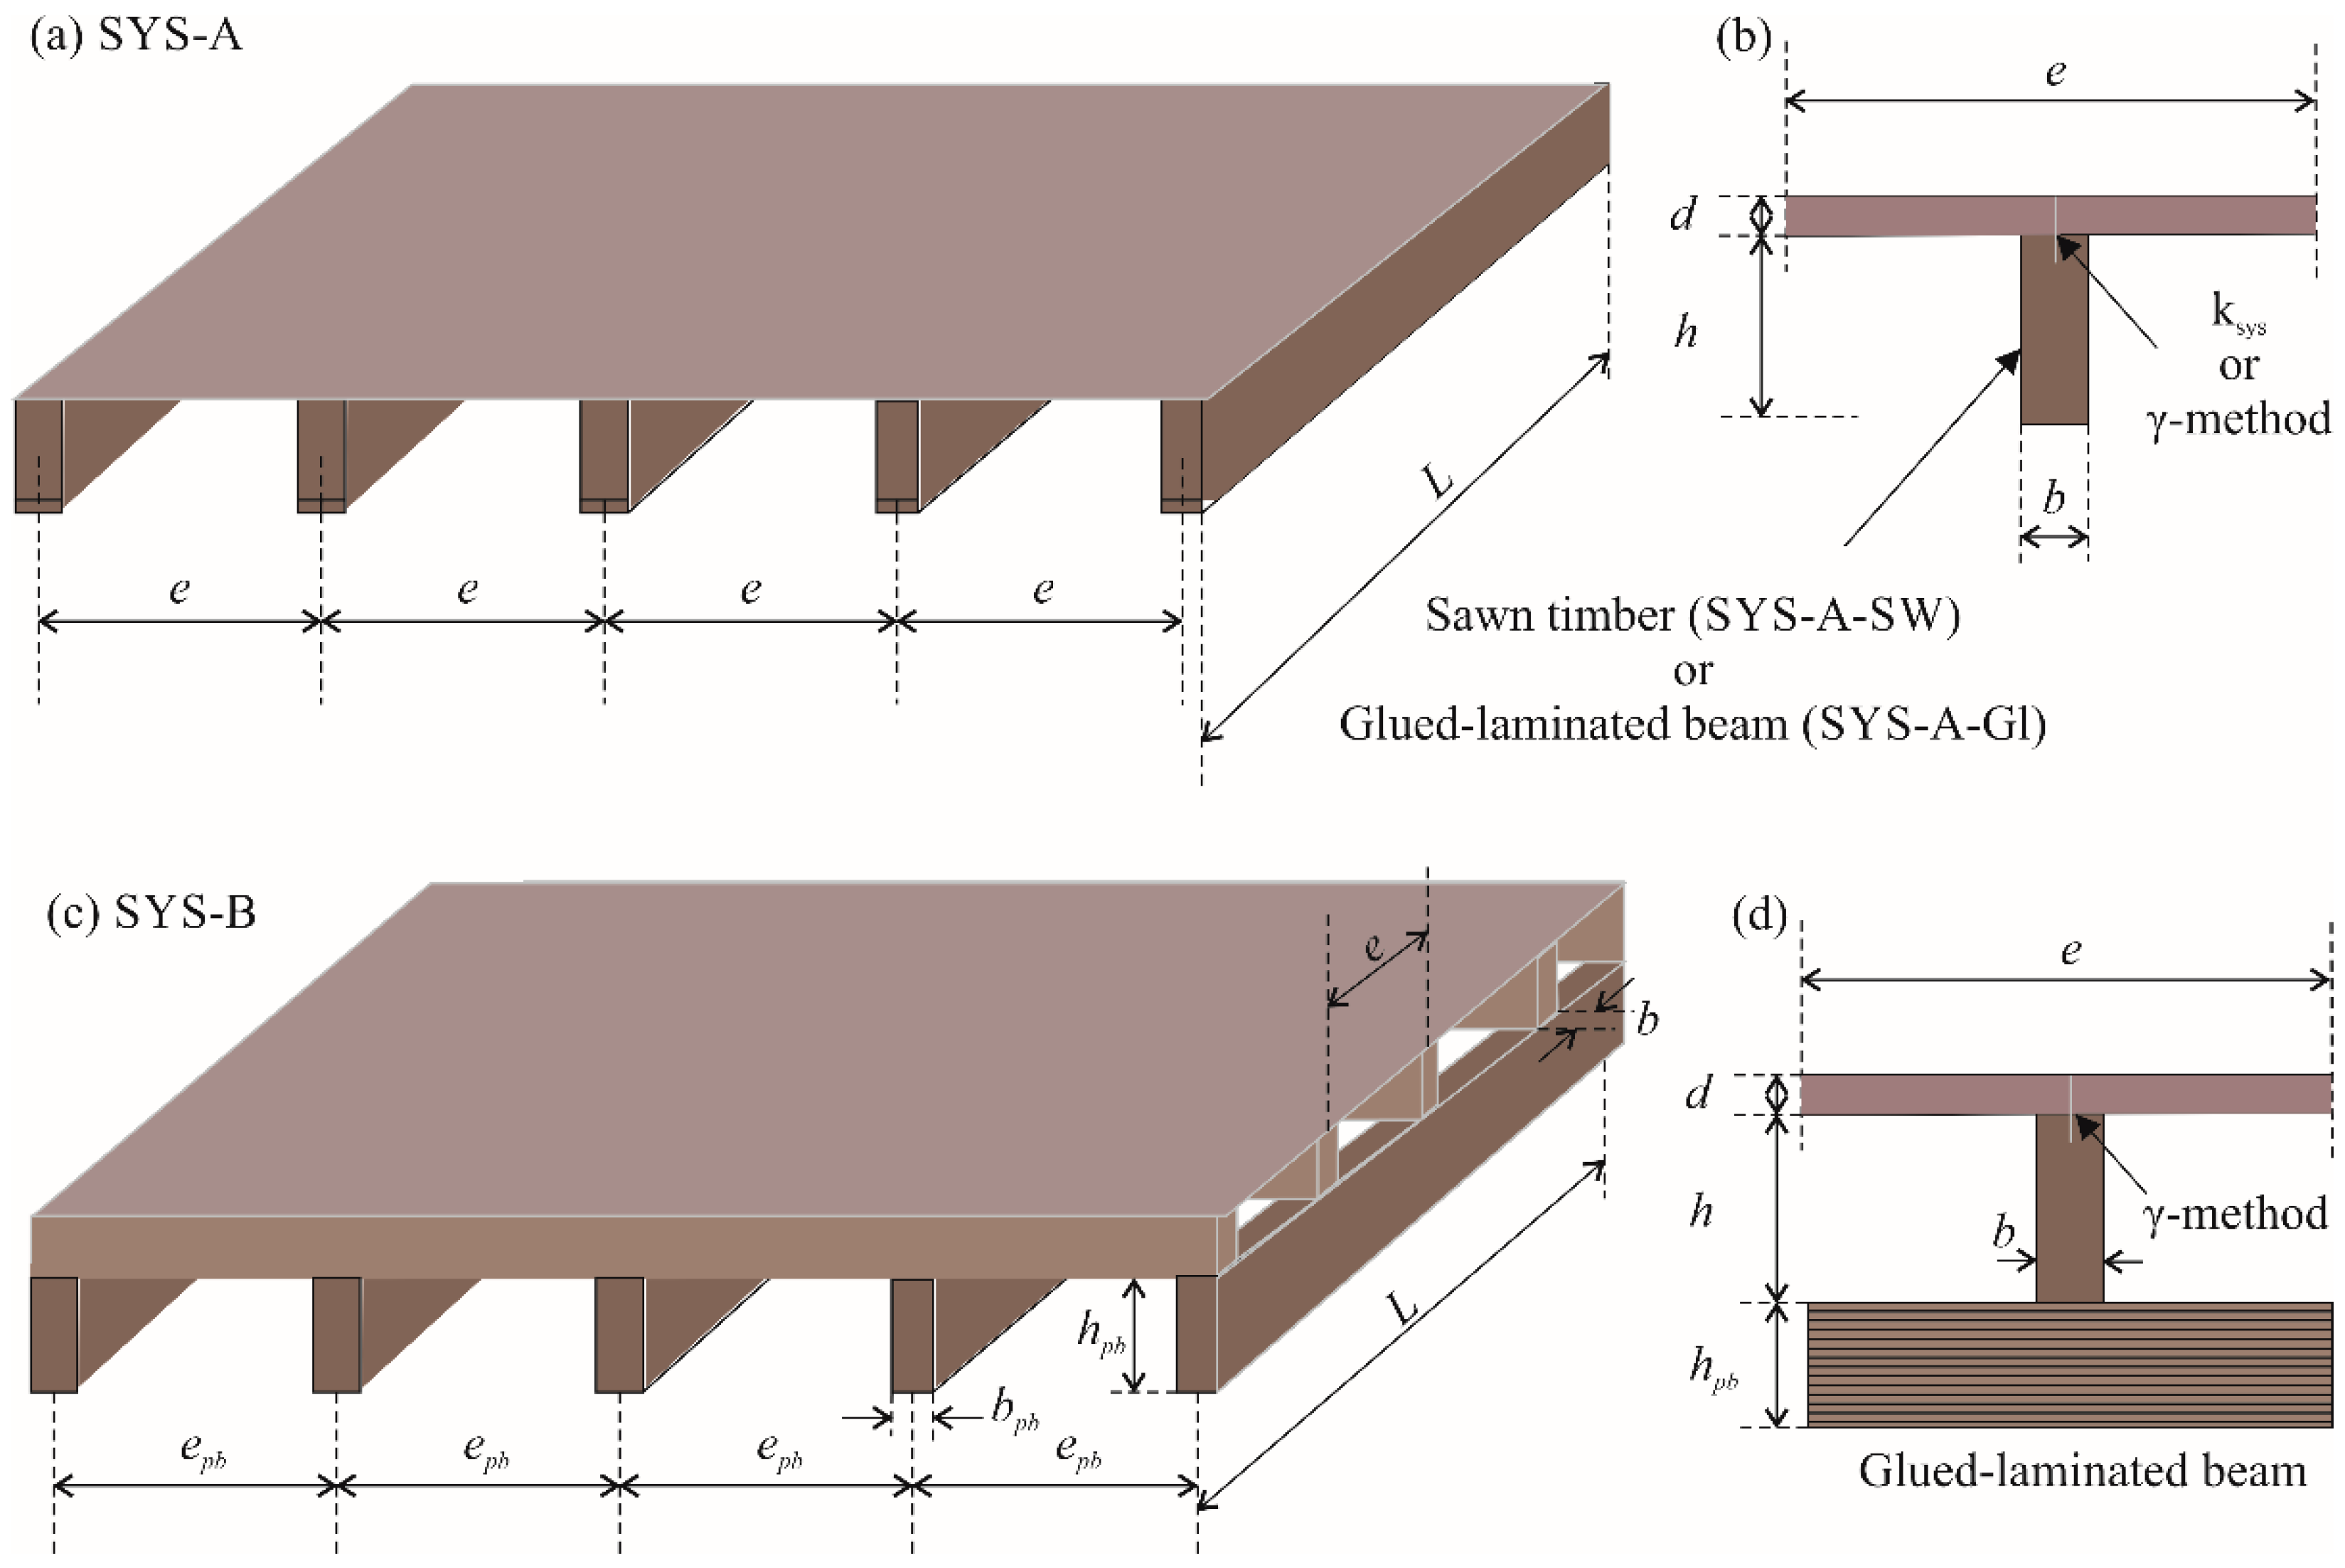 Materials | Free Full-Text | Optimal Design and Competitive Spans of Timber  Floor Joists Based on Multi-Parametric MINLP Optimization | HTML